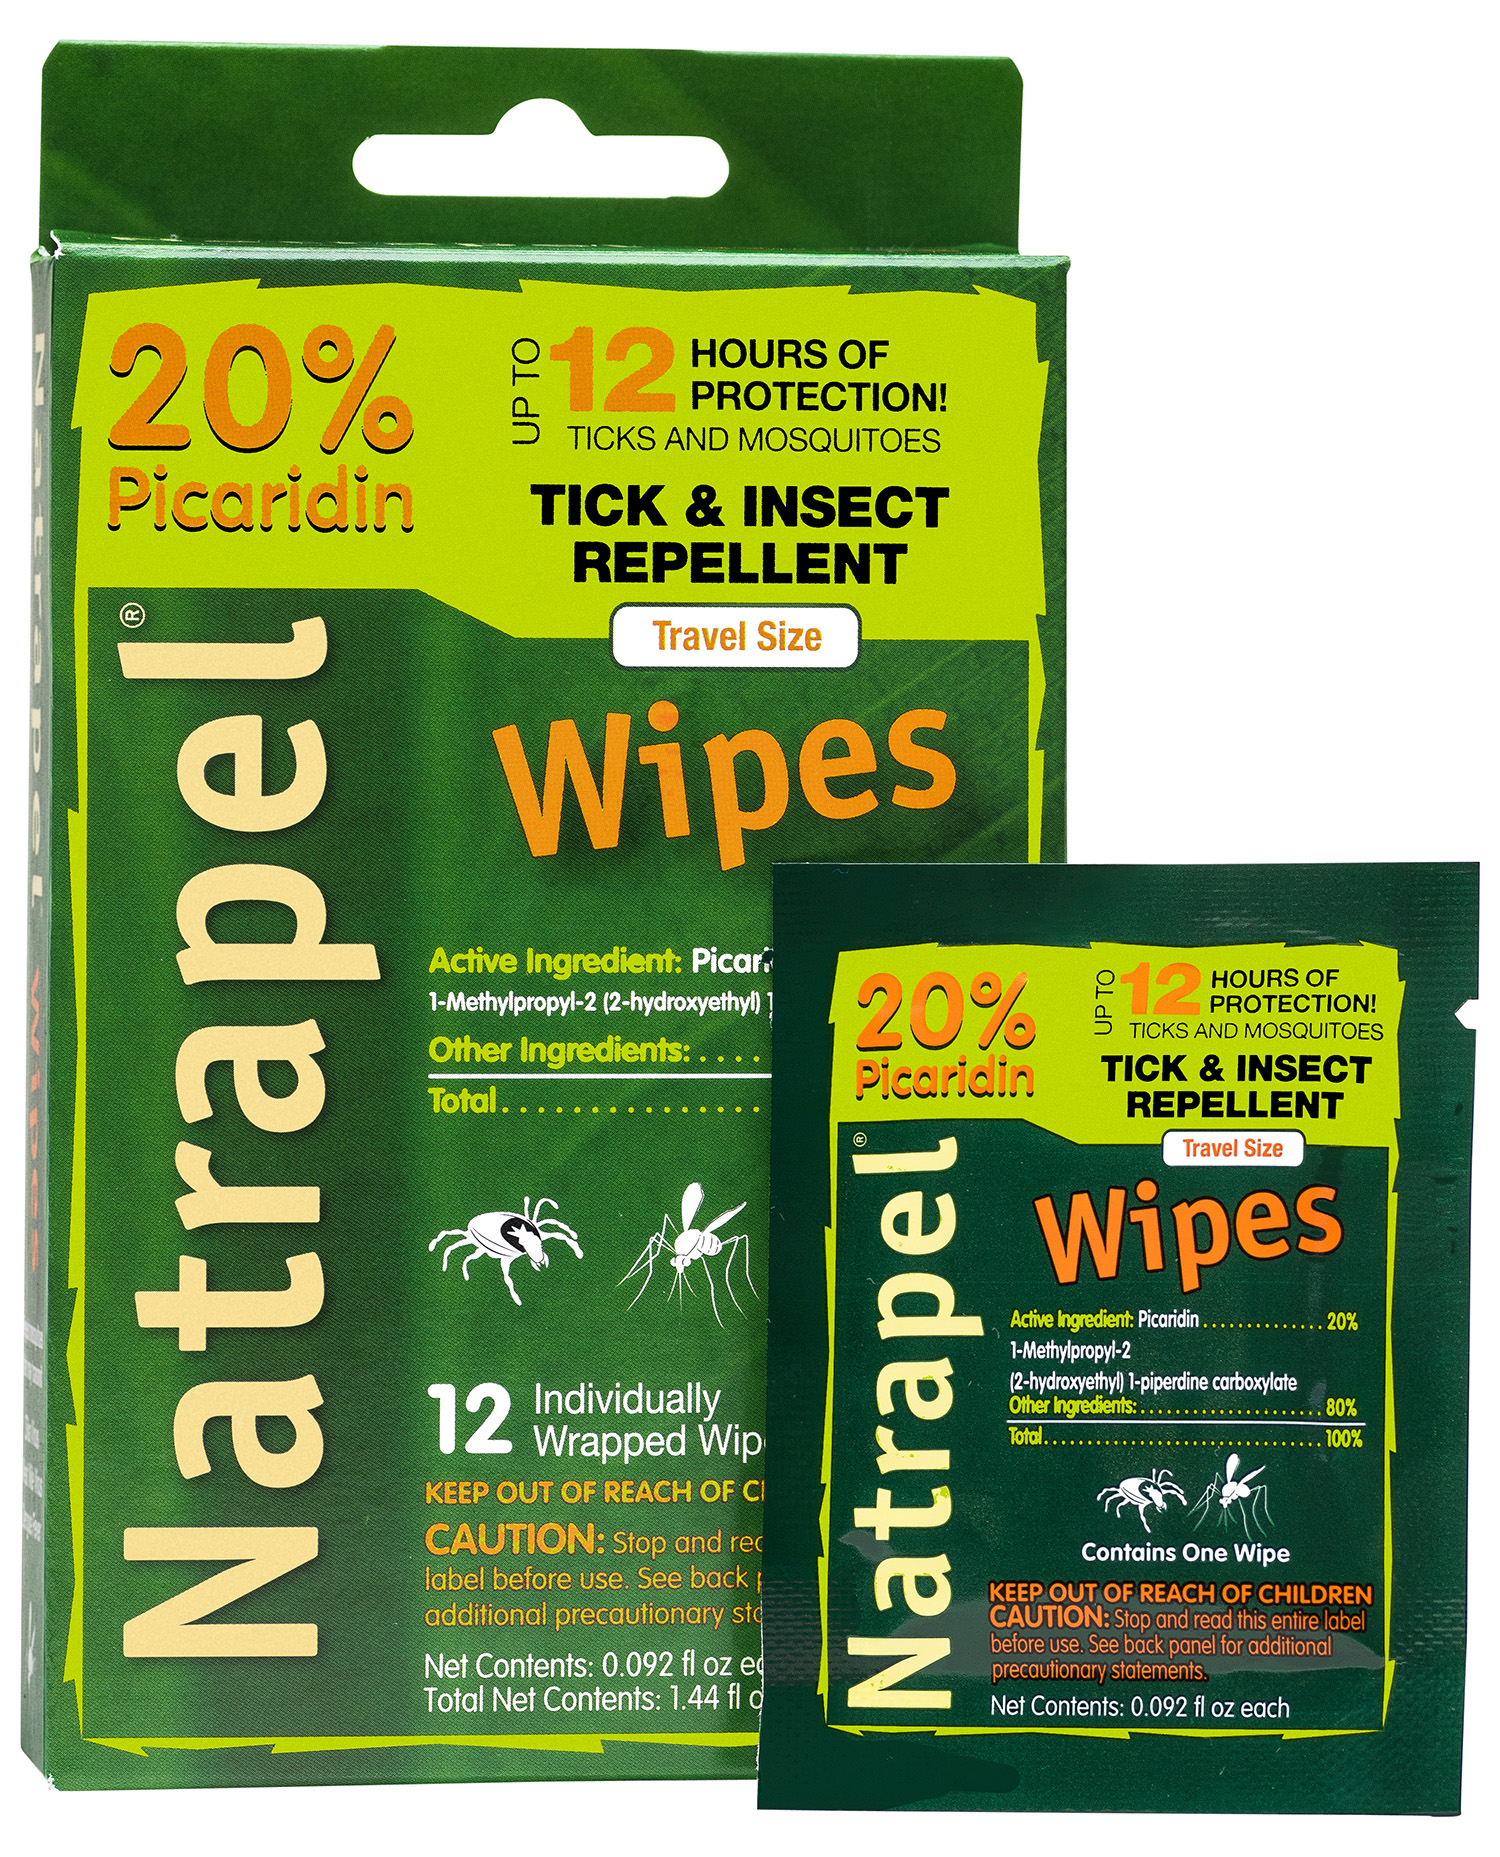 INSECT REPELLENT & SUNSCREEN